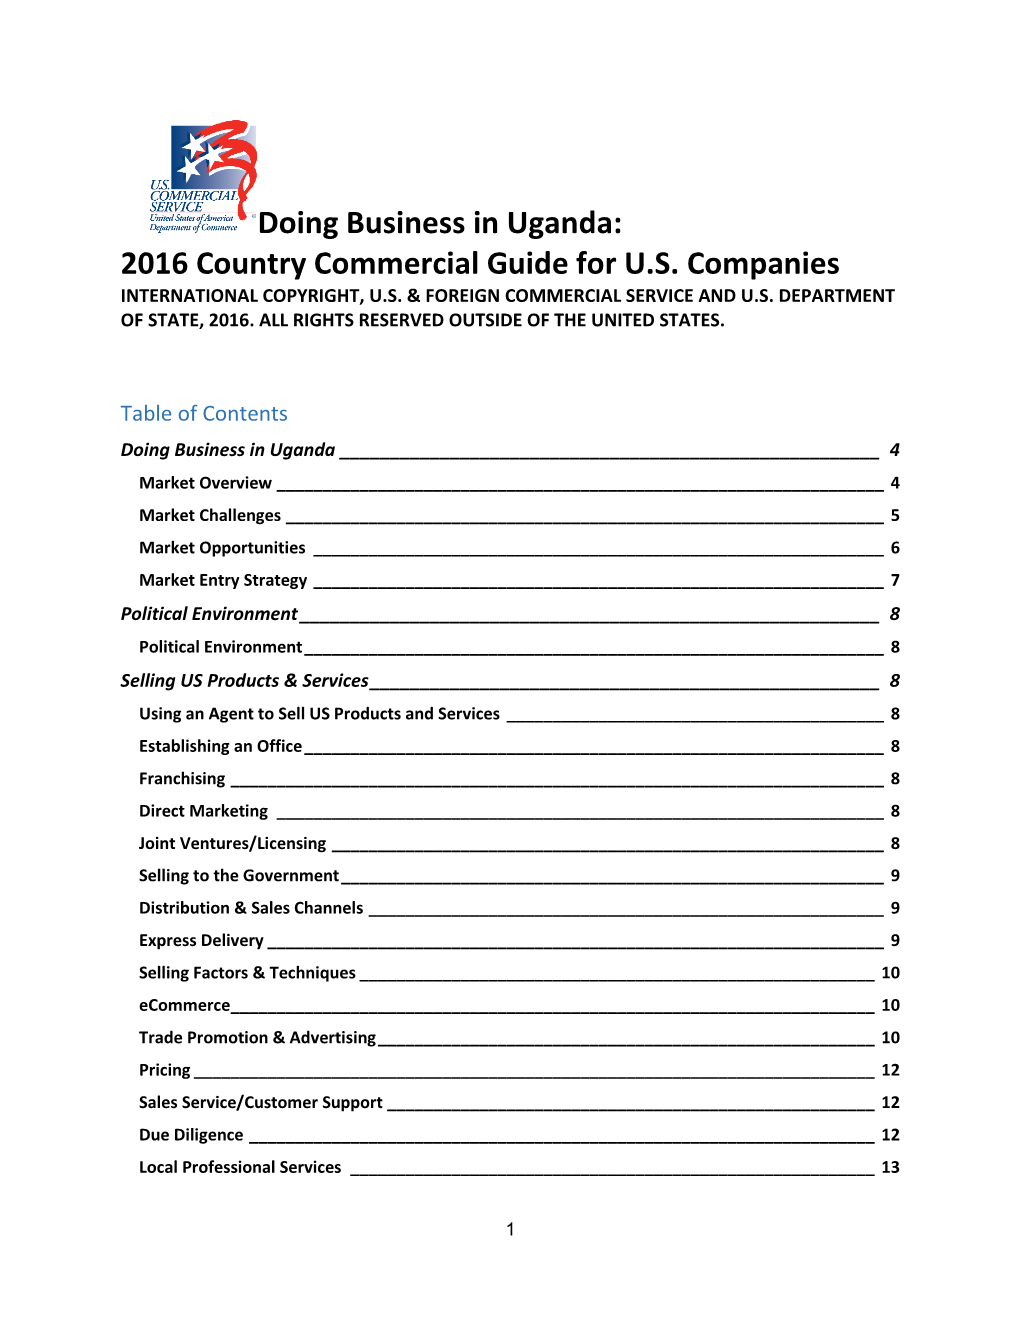 2016 Country Commercial Guide for US Companies